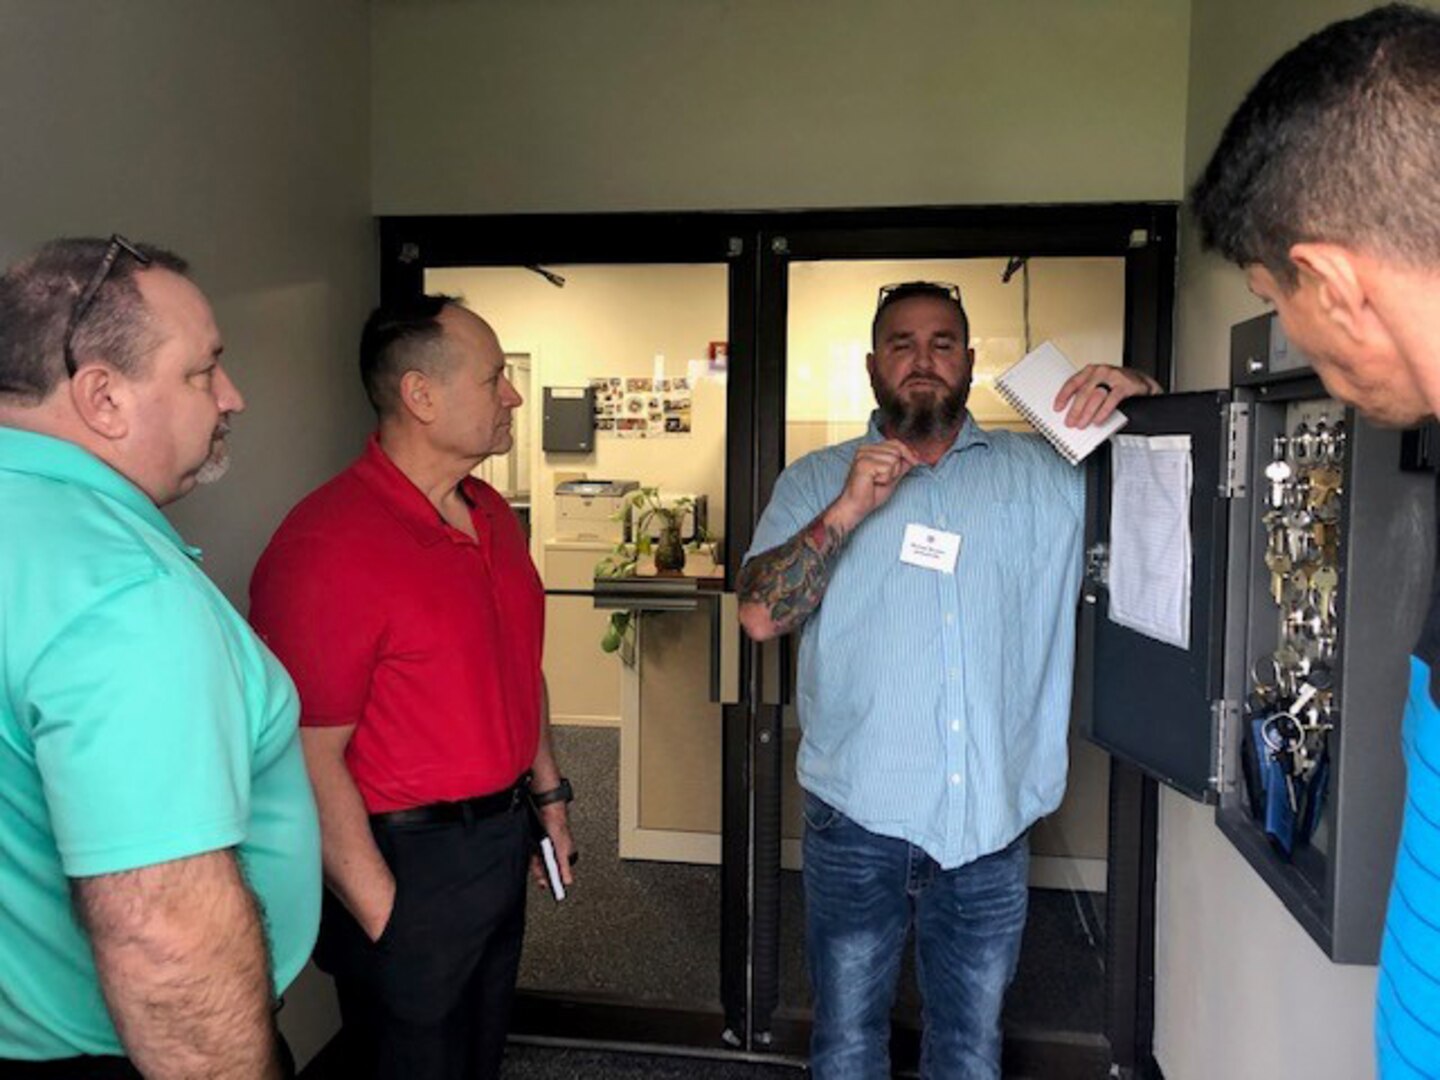 DLA Disposition Services Operations Director, Arthur Welsh, (far left), DLA Disposition Services Chief of Staff, Pete Foreman, (left center) and Jacksonville Wage Supervisor, Jose De La Cruz, (far right) listen as Jacksonville Area Manager, Mike Brower, discusses key control procedures.